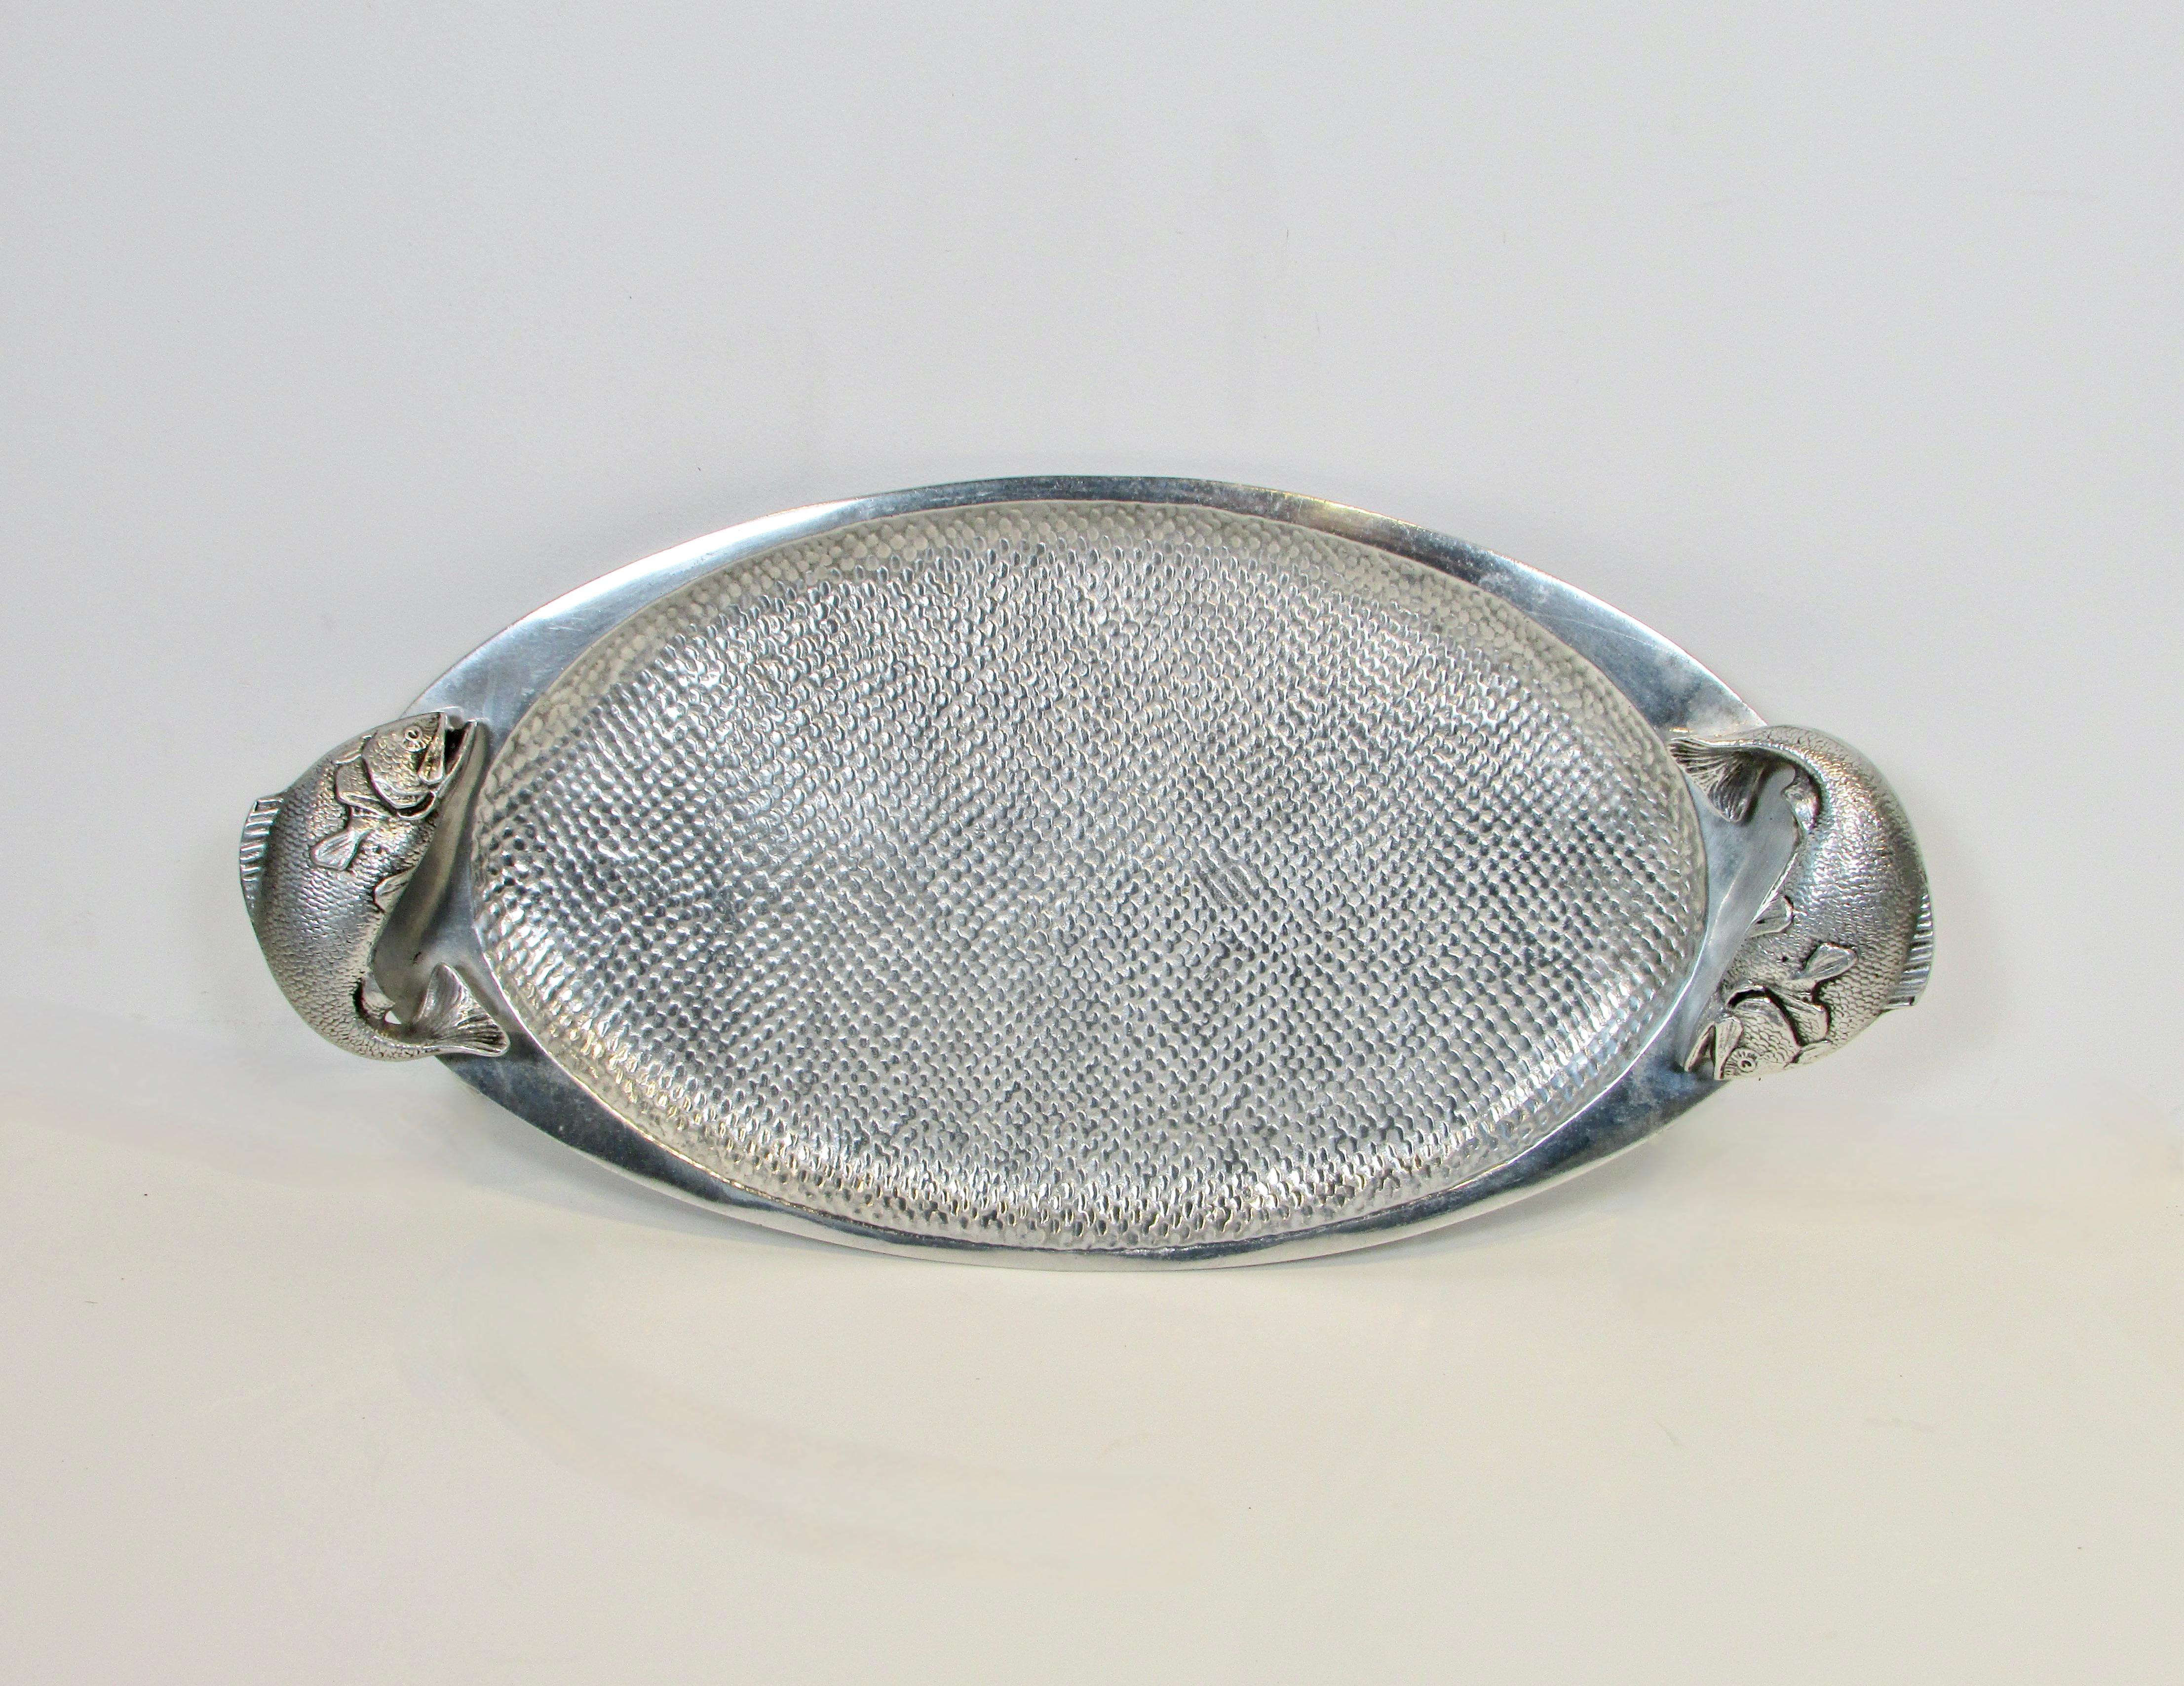 Polished cast Aluminum tray with fish handles . Nicely cast  oval tray marked Bruce Fox Design Wilton Columbia Pa.